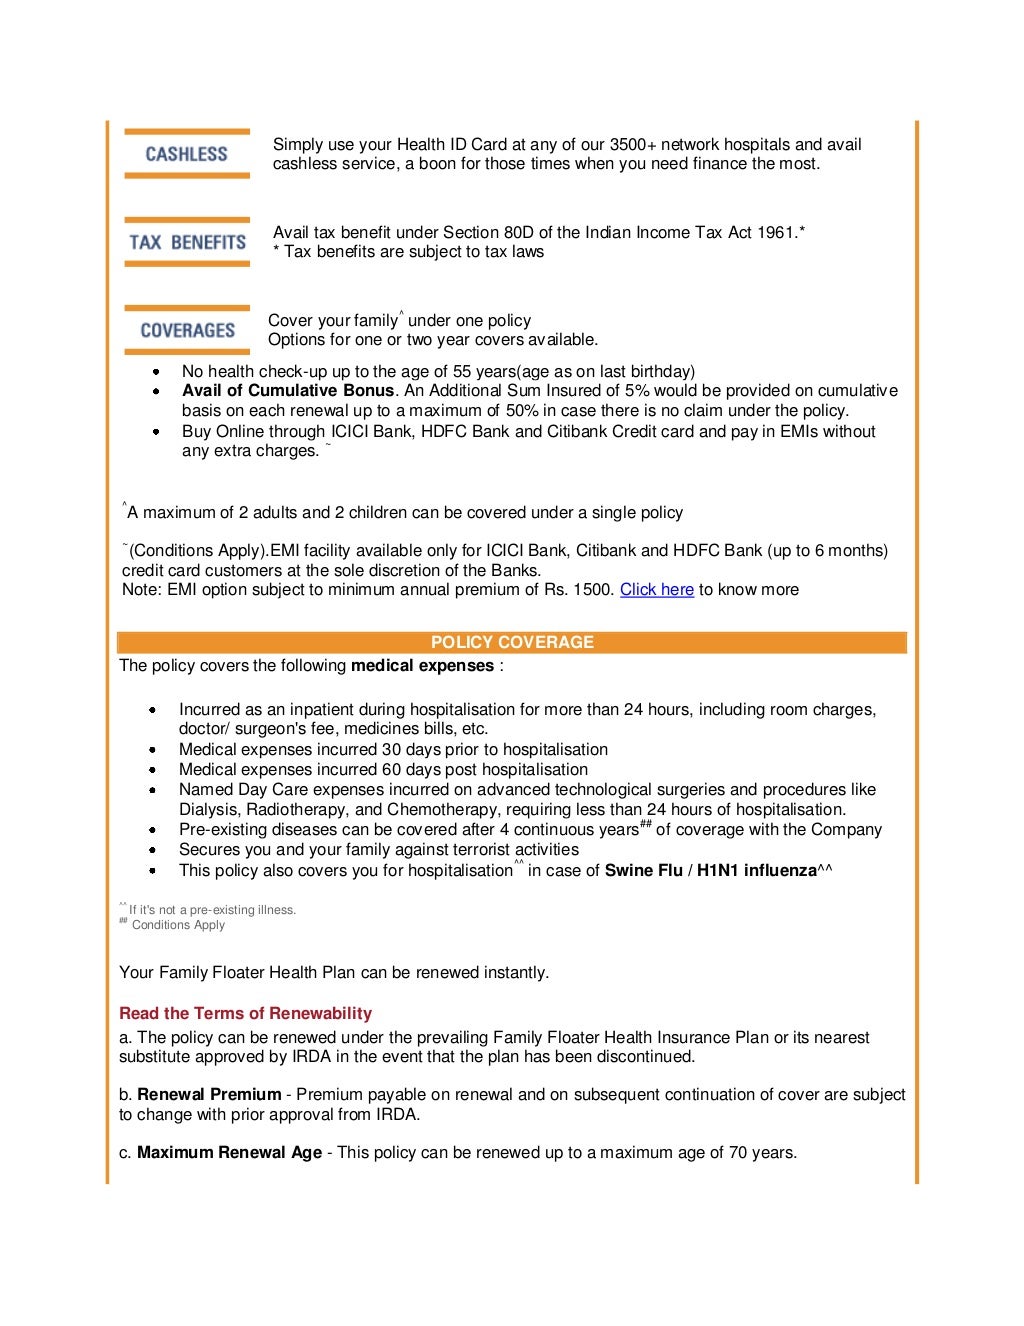 Icici lombard family floater health insurance policy (1)